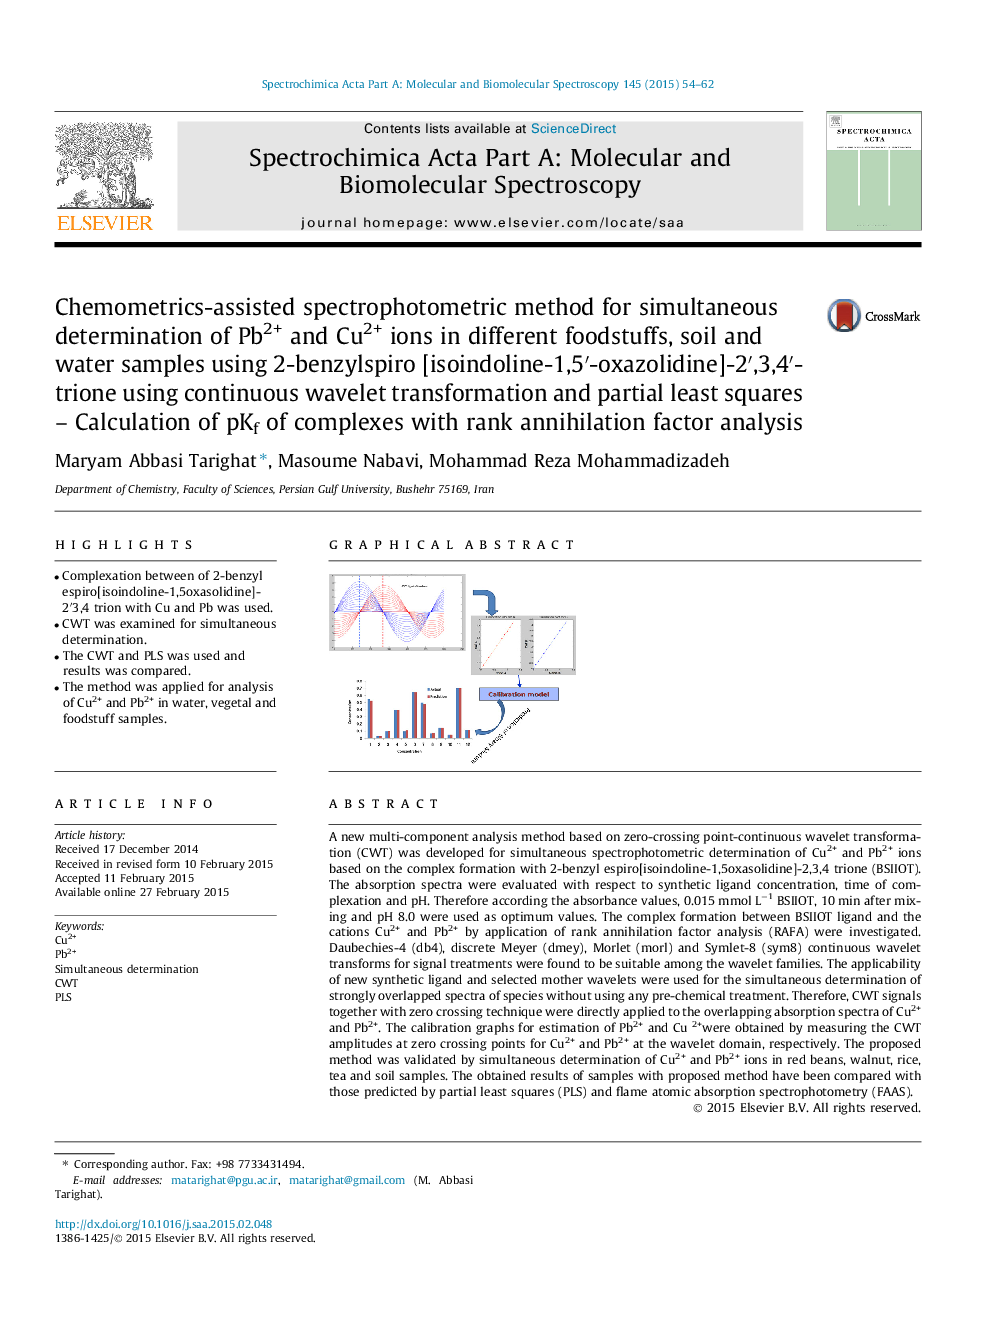 Chemometrics-assisted spectrophotometric method for simultaneous determination of Pb2+ and Cu2+ ions in different foodstuffs, soil and water samples using 2-benzylspiro [isoindoline-1,5′-oxazolidine]-2′,3,4′-trione using continuous wavelet transformation 